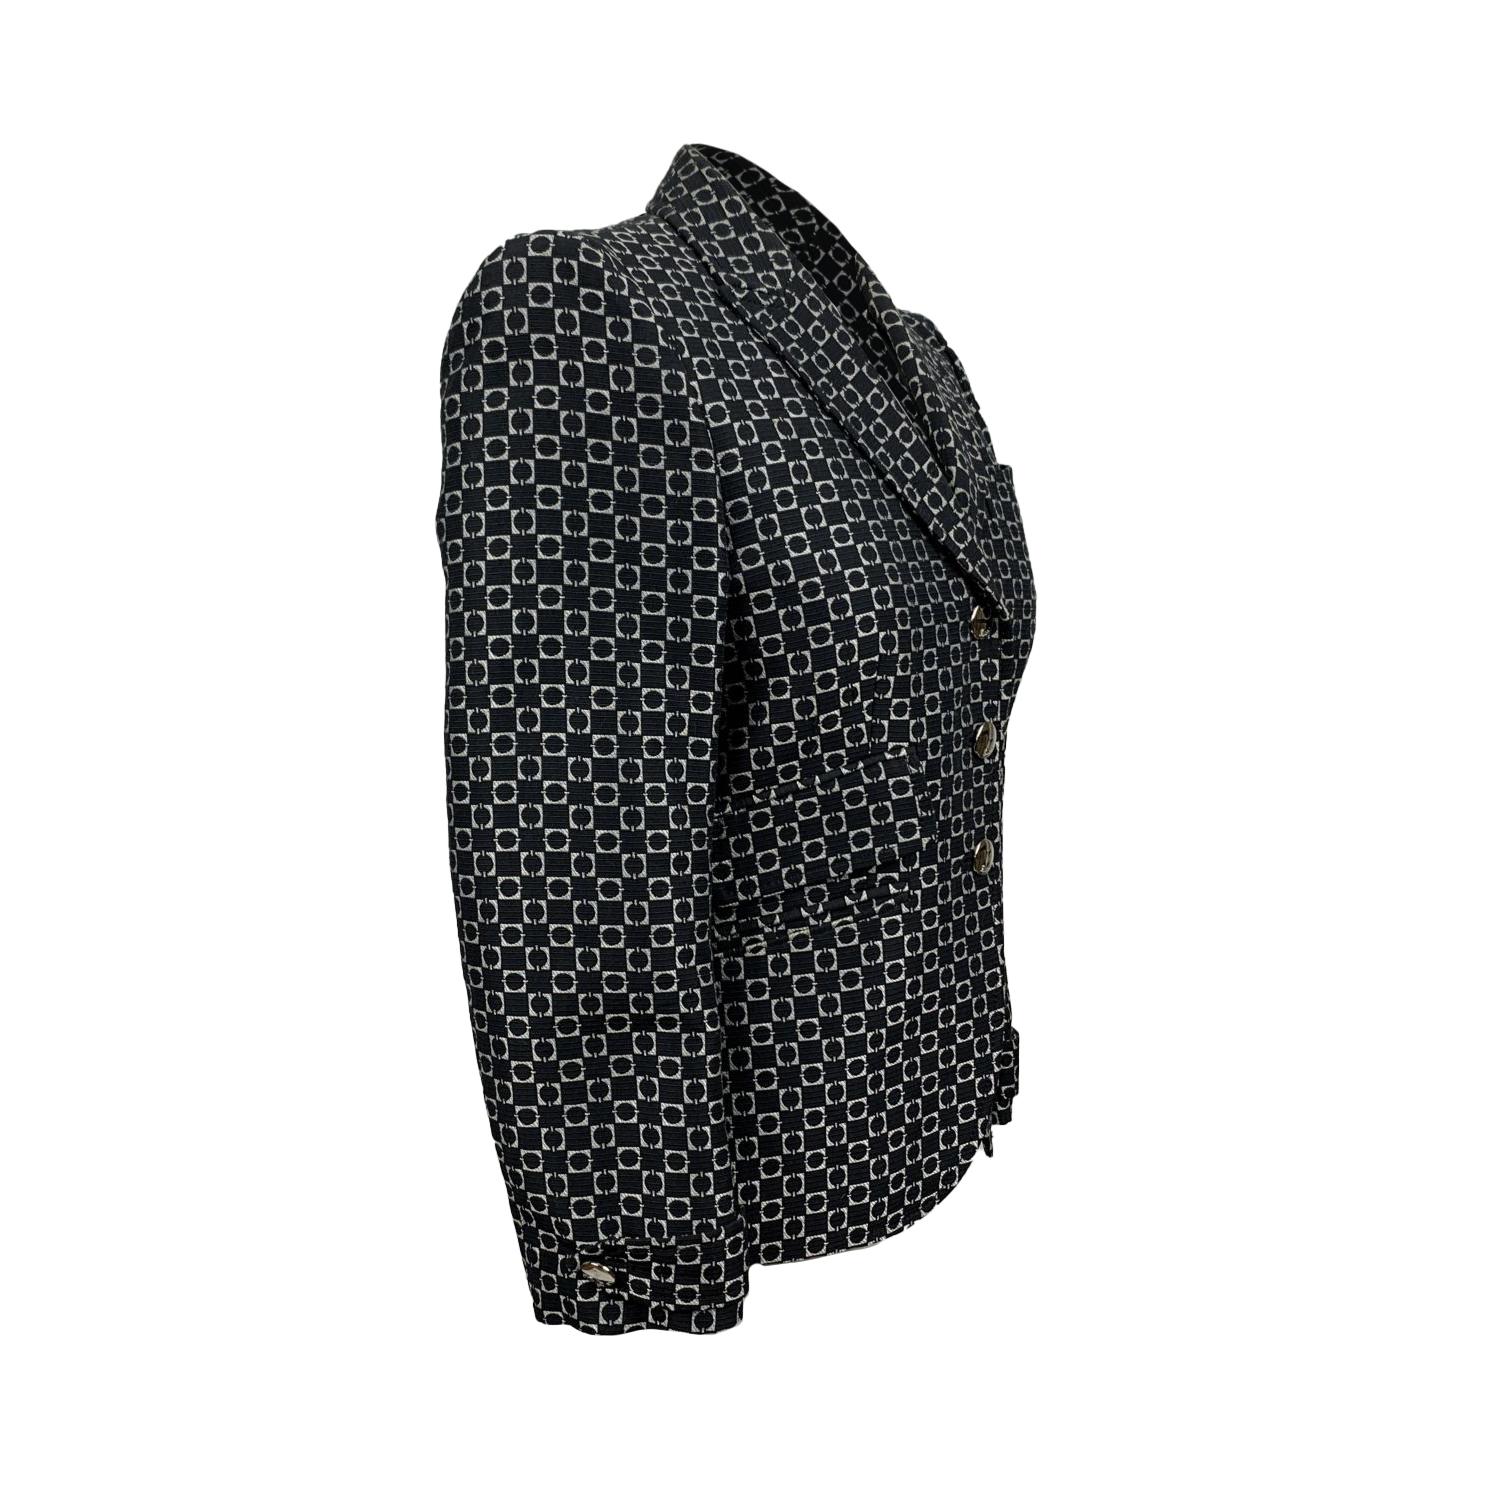 Gucci Black Patterned Cotton and Silk Blazer Jacket Size 40 IT In Excellent Condition In Rome, Rome